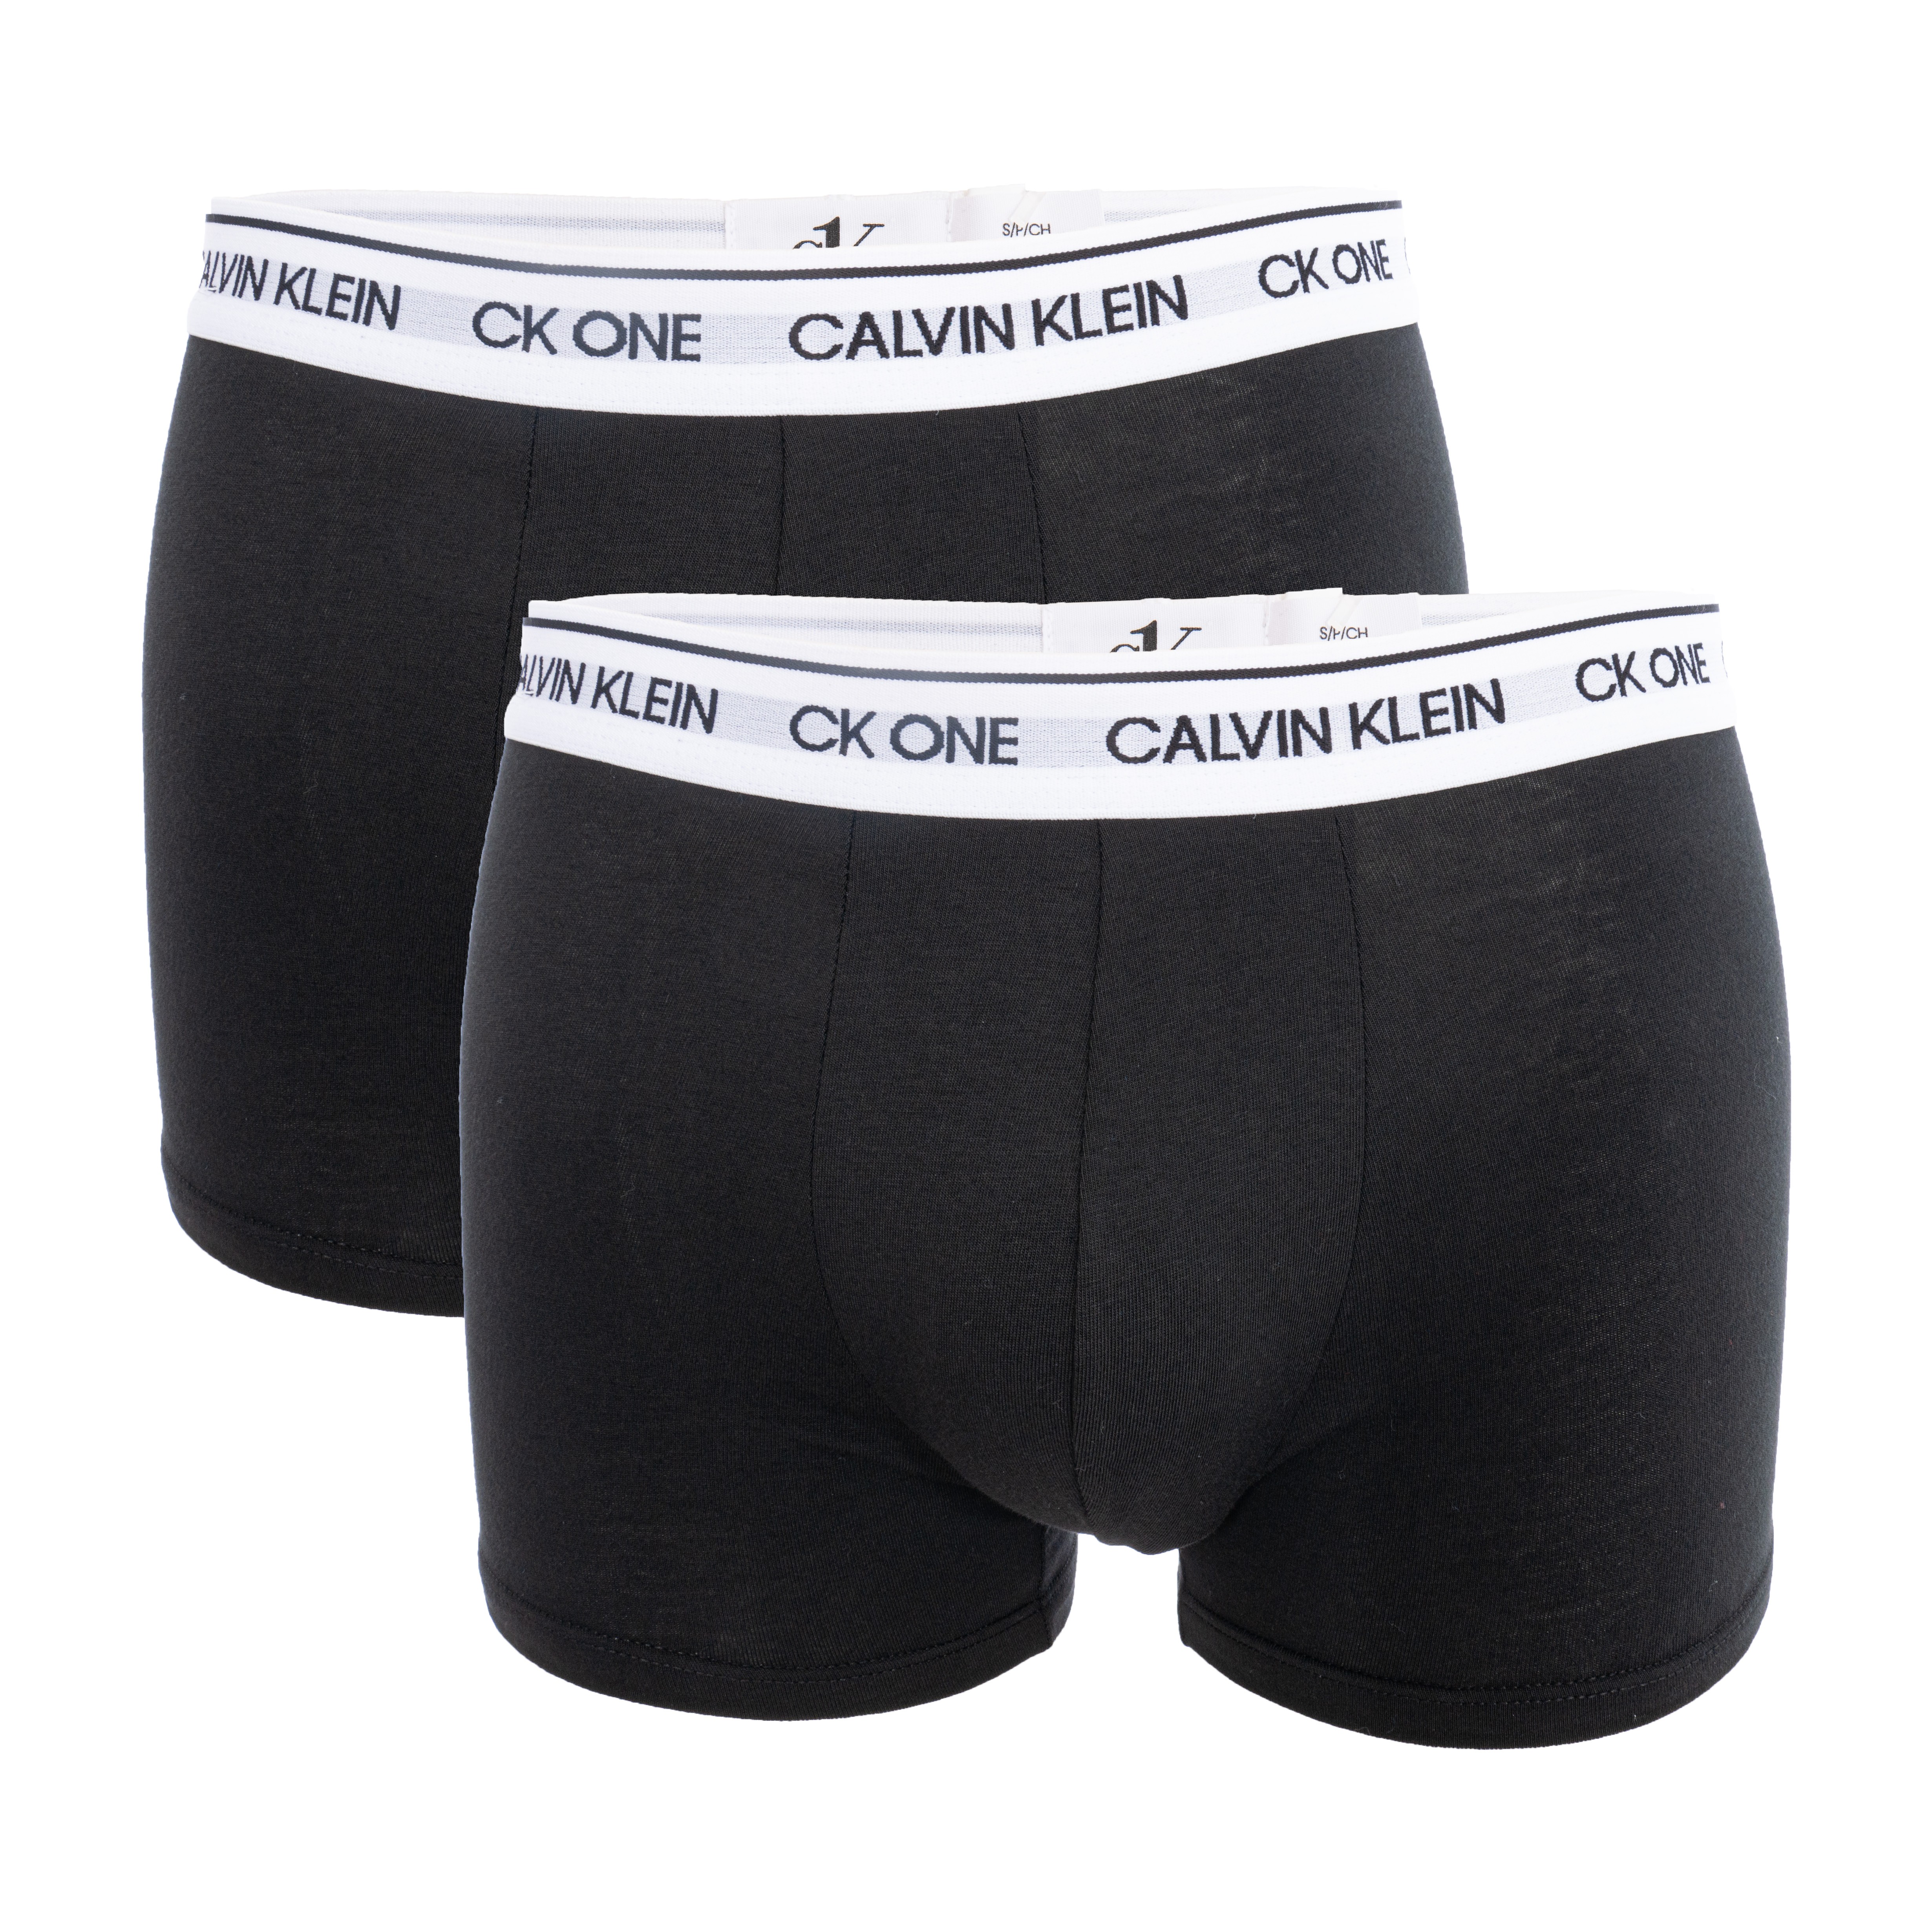 Lot of 2 boxers Calvin Klein - CK one black: Packs for man brand Ca